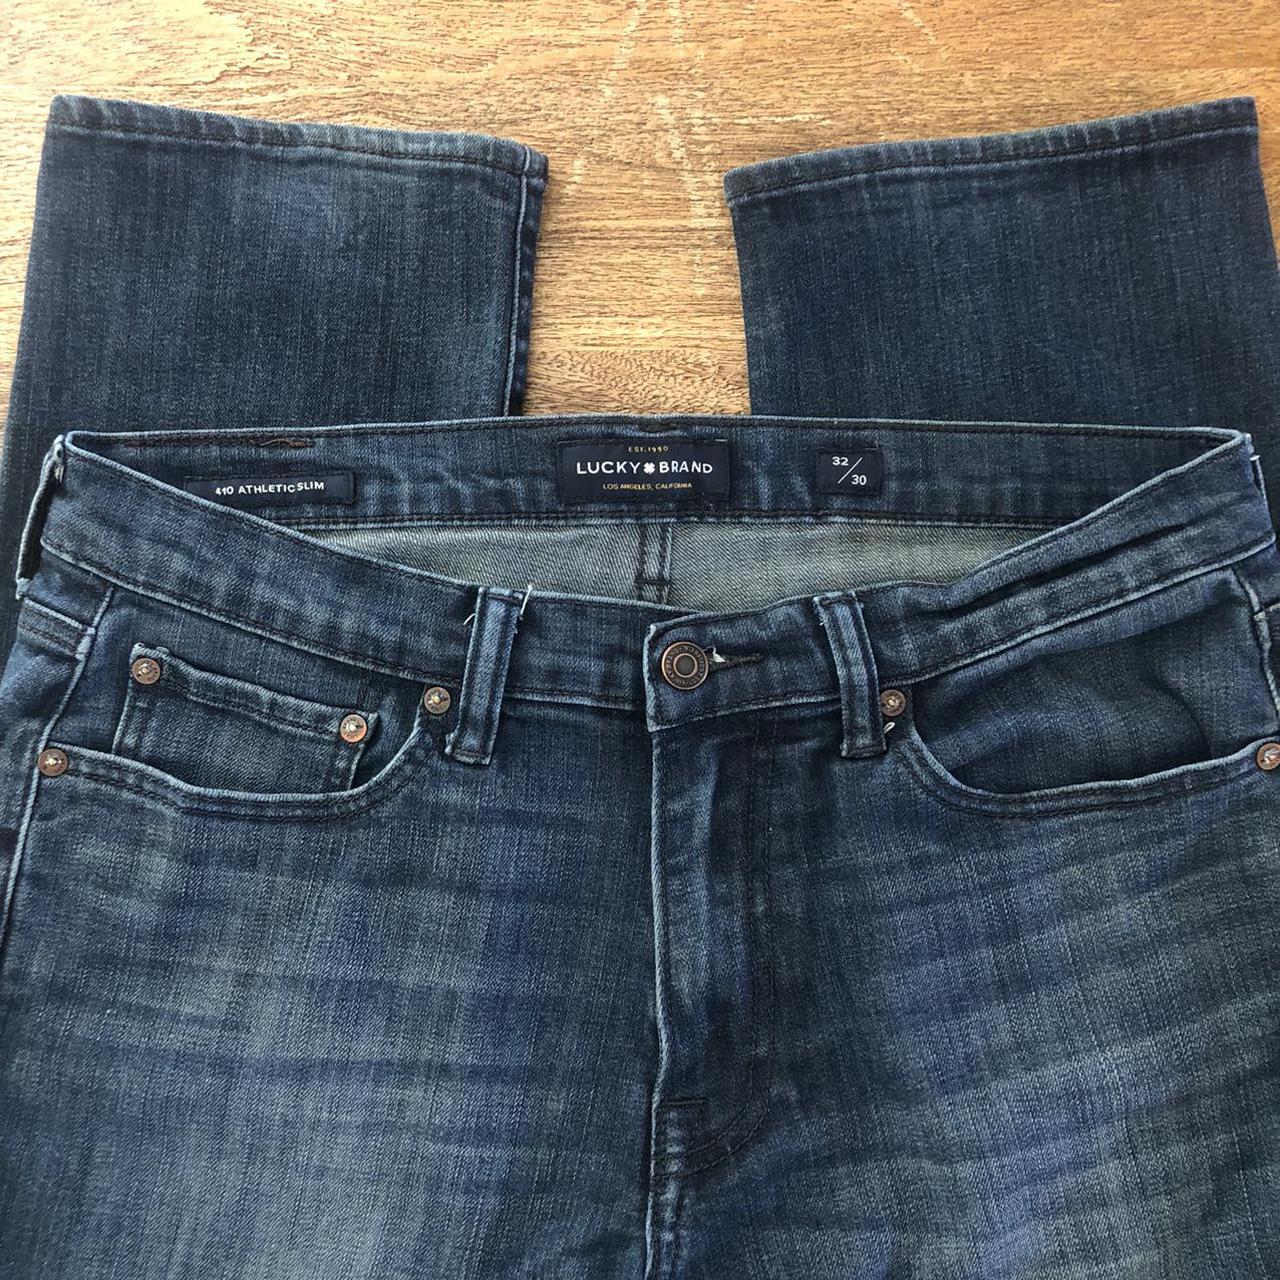 Product Image 3 - Lucky Brand 410 Athletic Slim